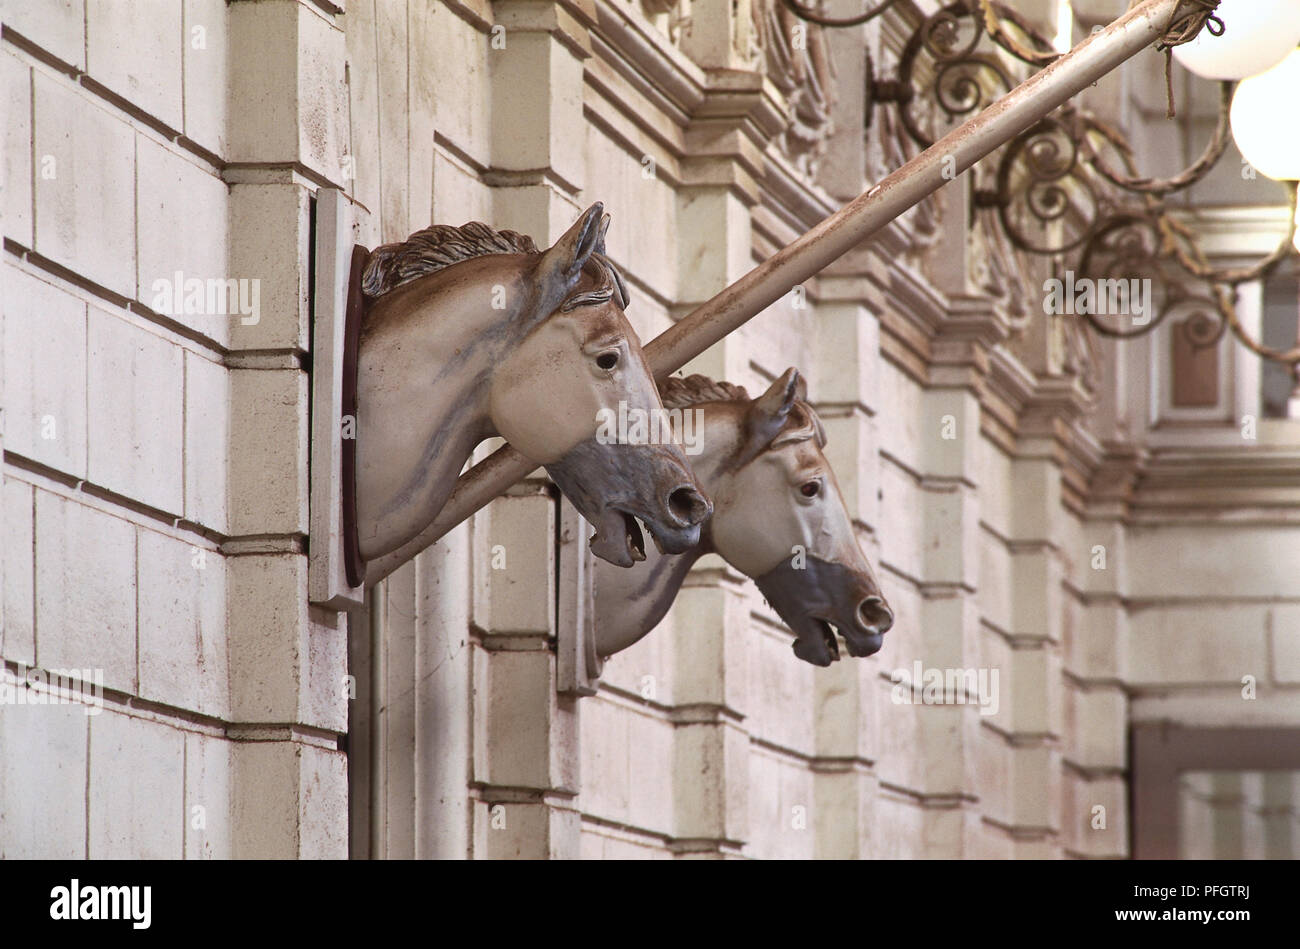 Holland, Amsterdam, statues of horses heads on the facade of Hollandse Manege or Dutch Riding School. Stock Photo